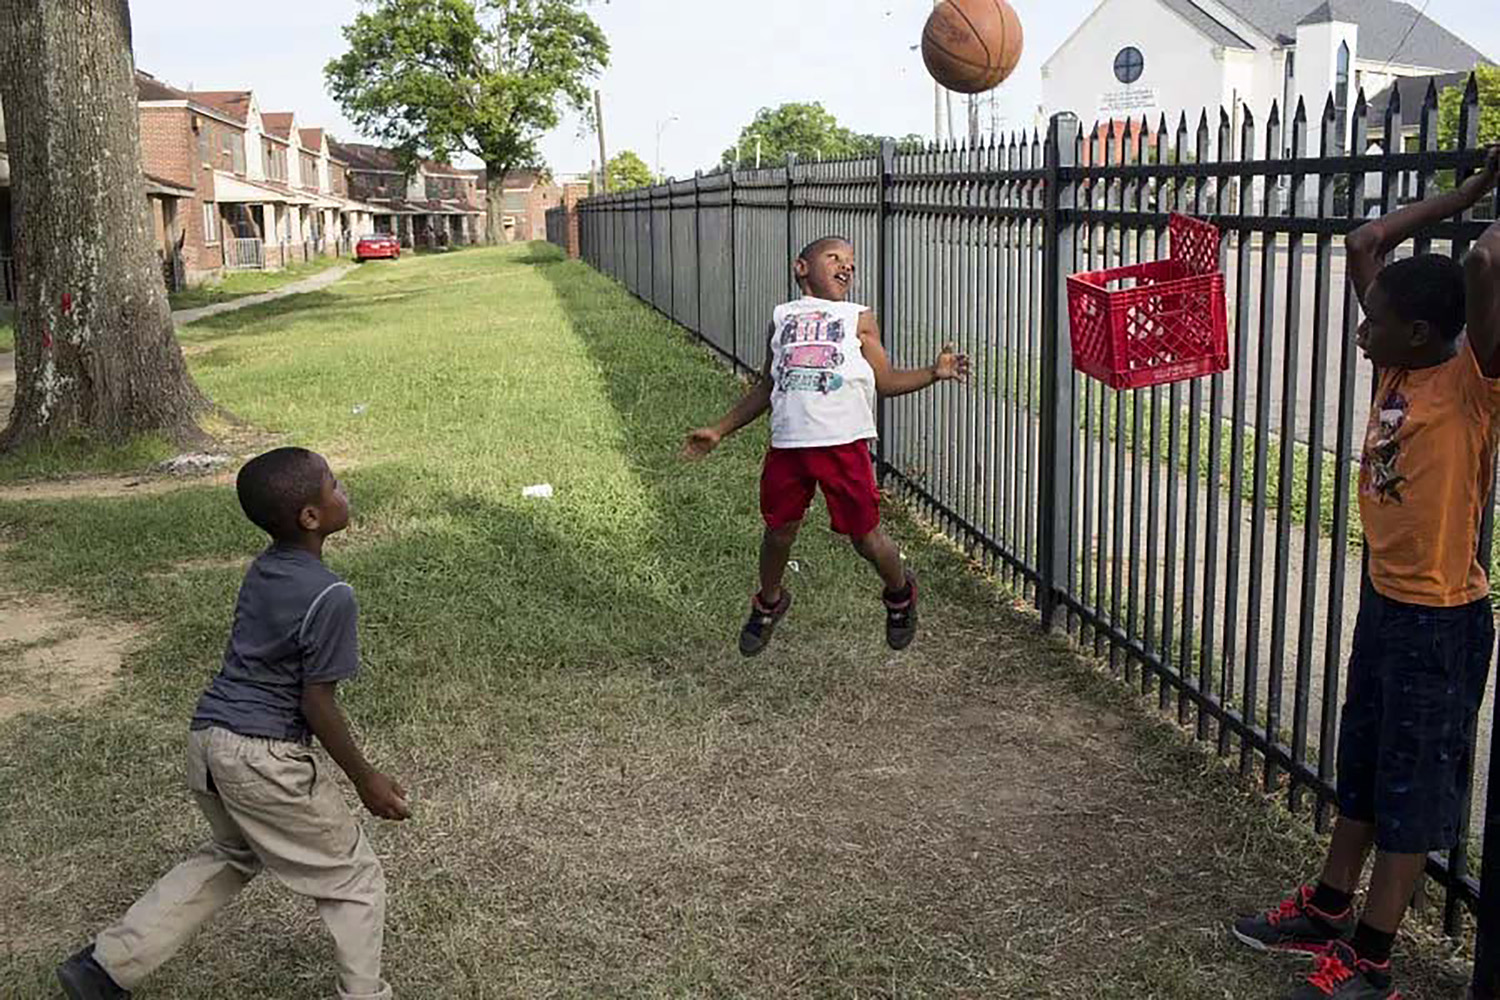 Three Black boys playing with a basketball on a grass lawn with a plastic bin attached to a fence acting as a basket.